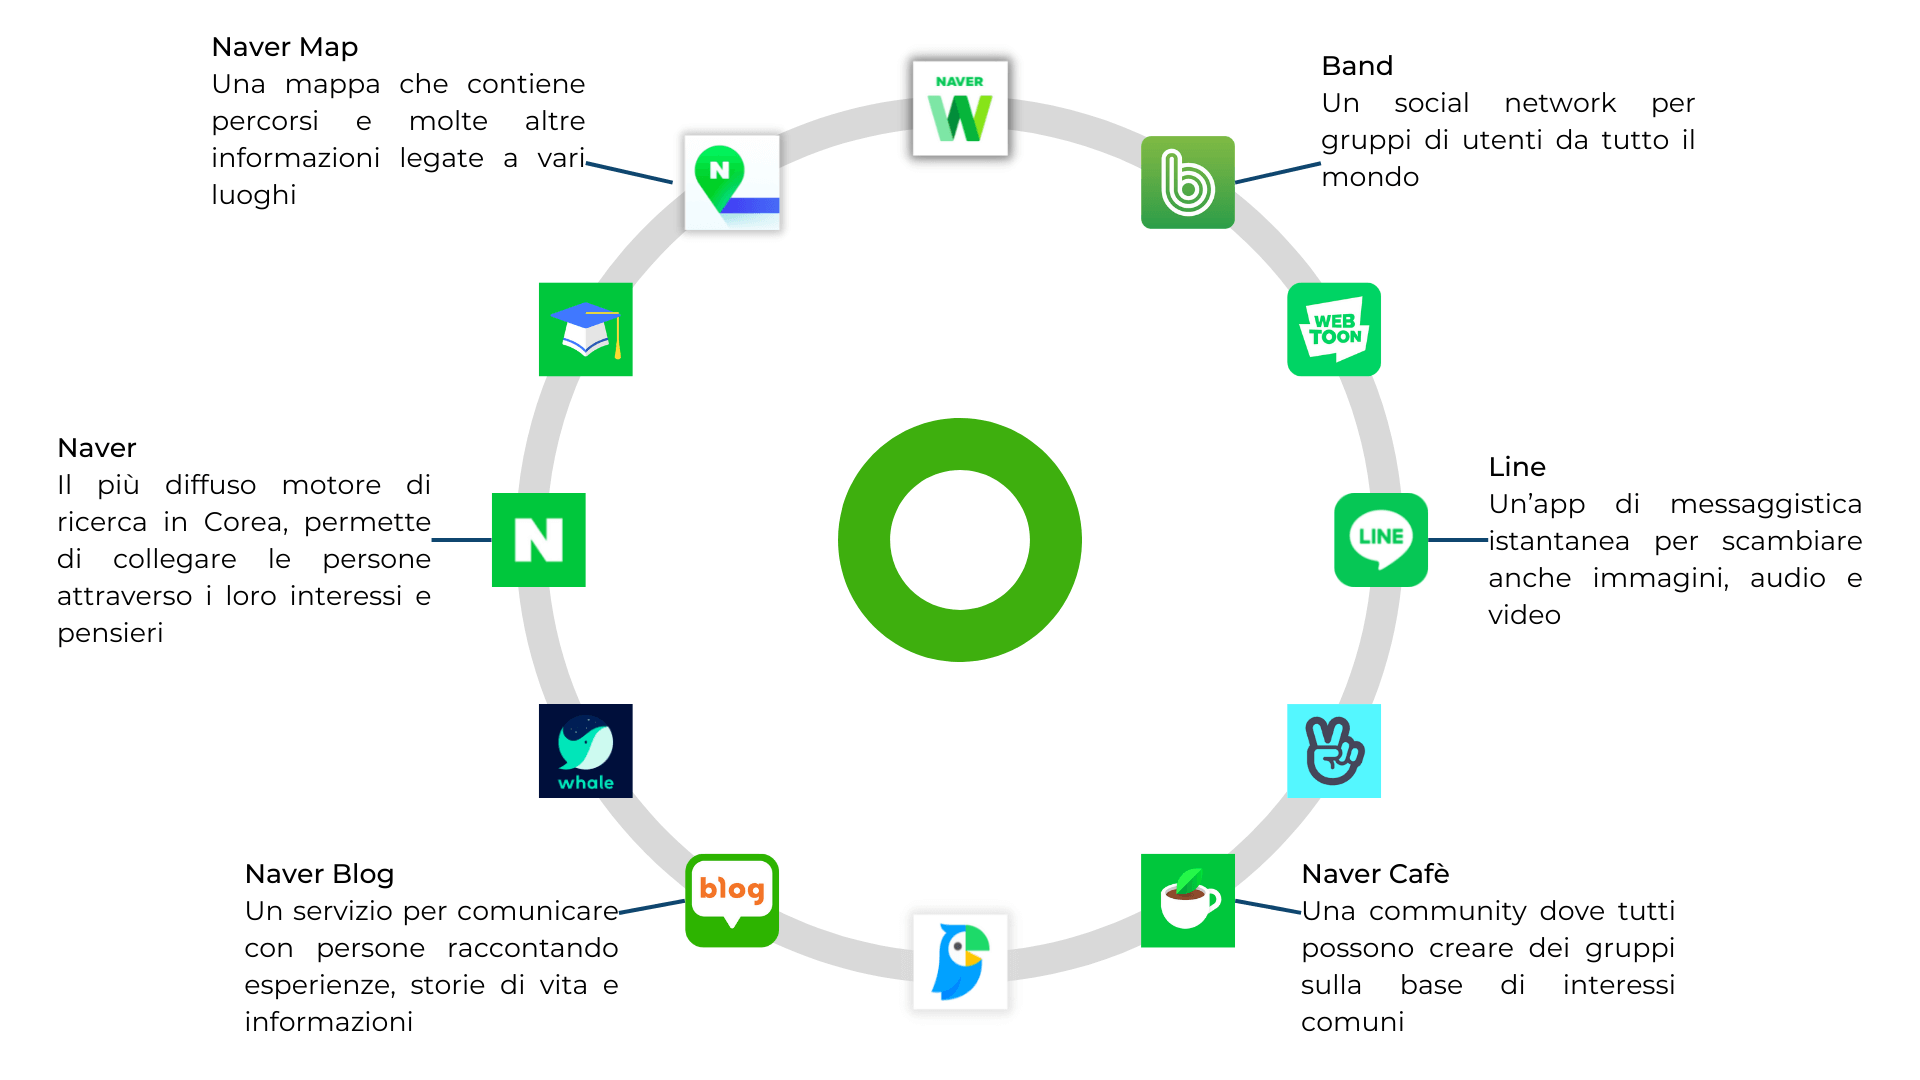 Using Naver for business means knowing the whole ecosystem